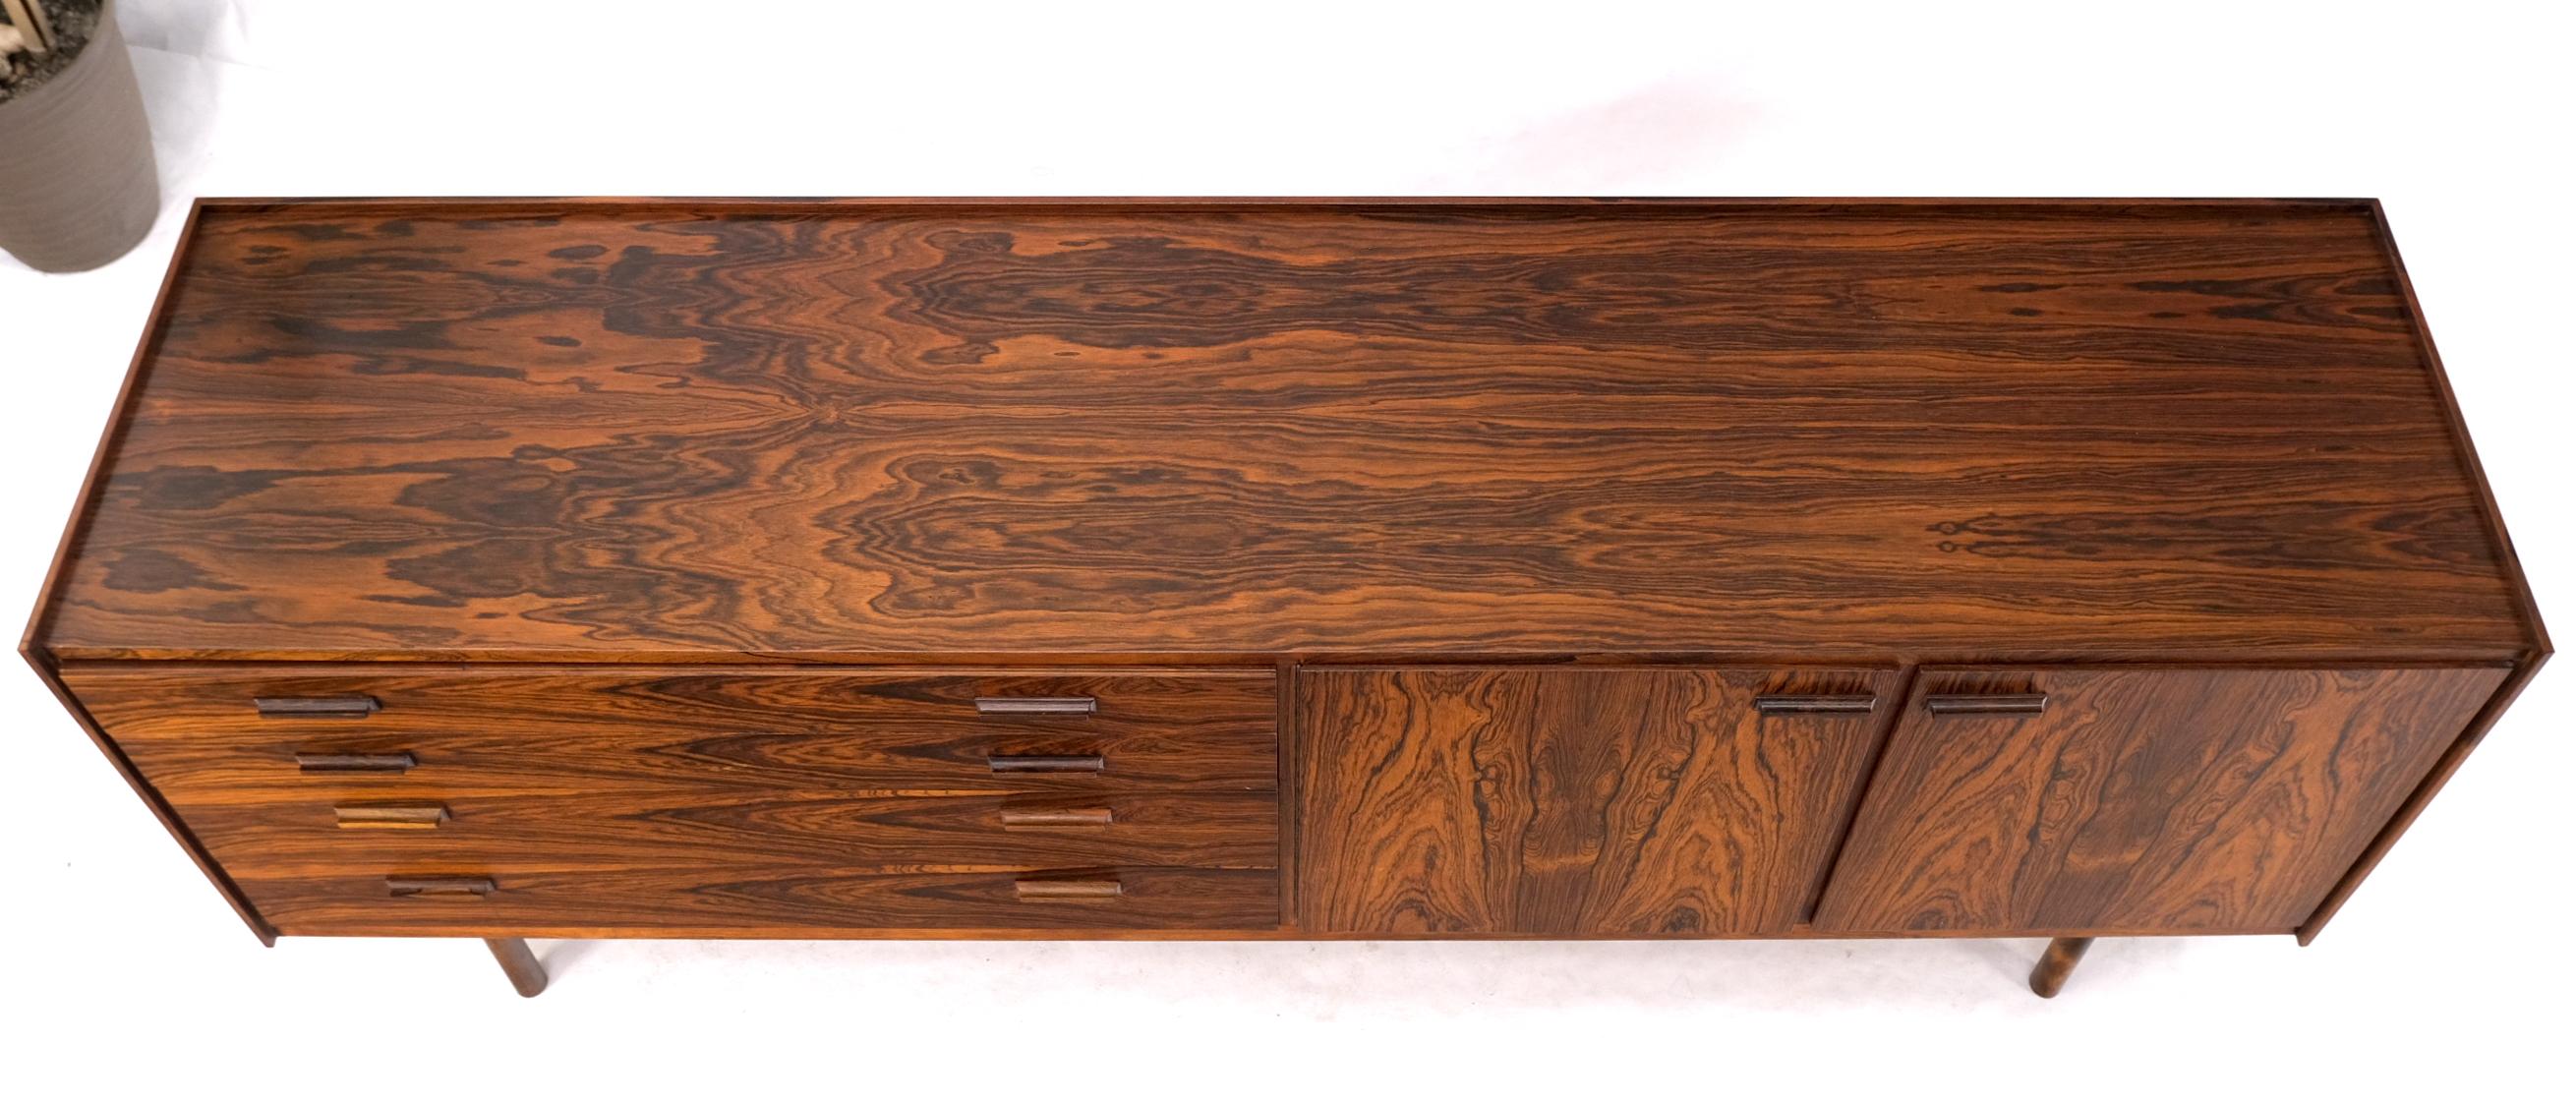 20th Century Rosewood Multi Drawers Two Doors Compartment Gallery Top Danish Credenza Dresser